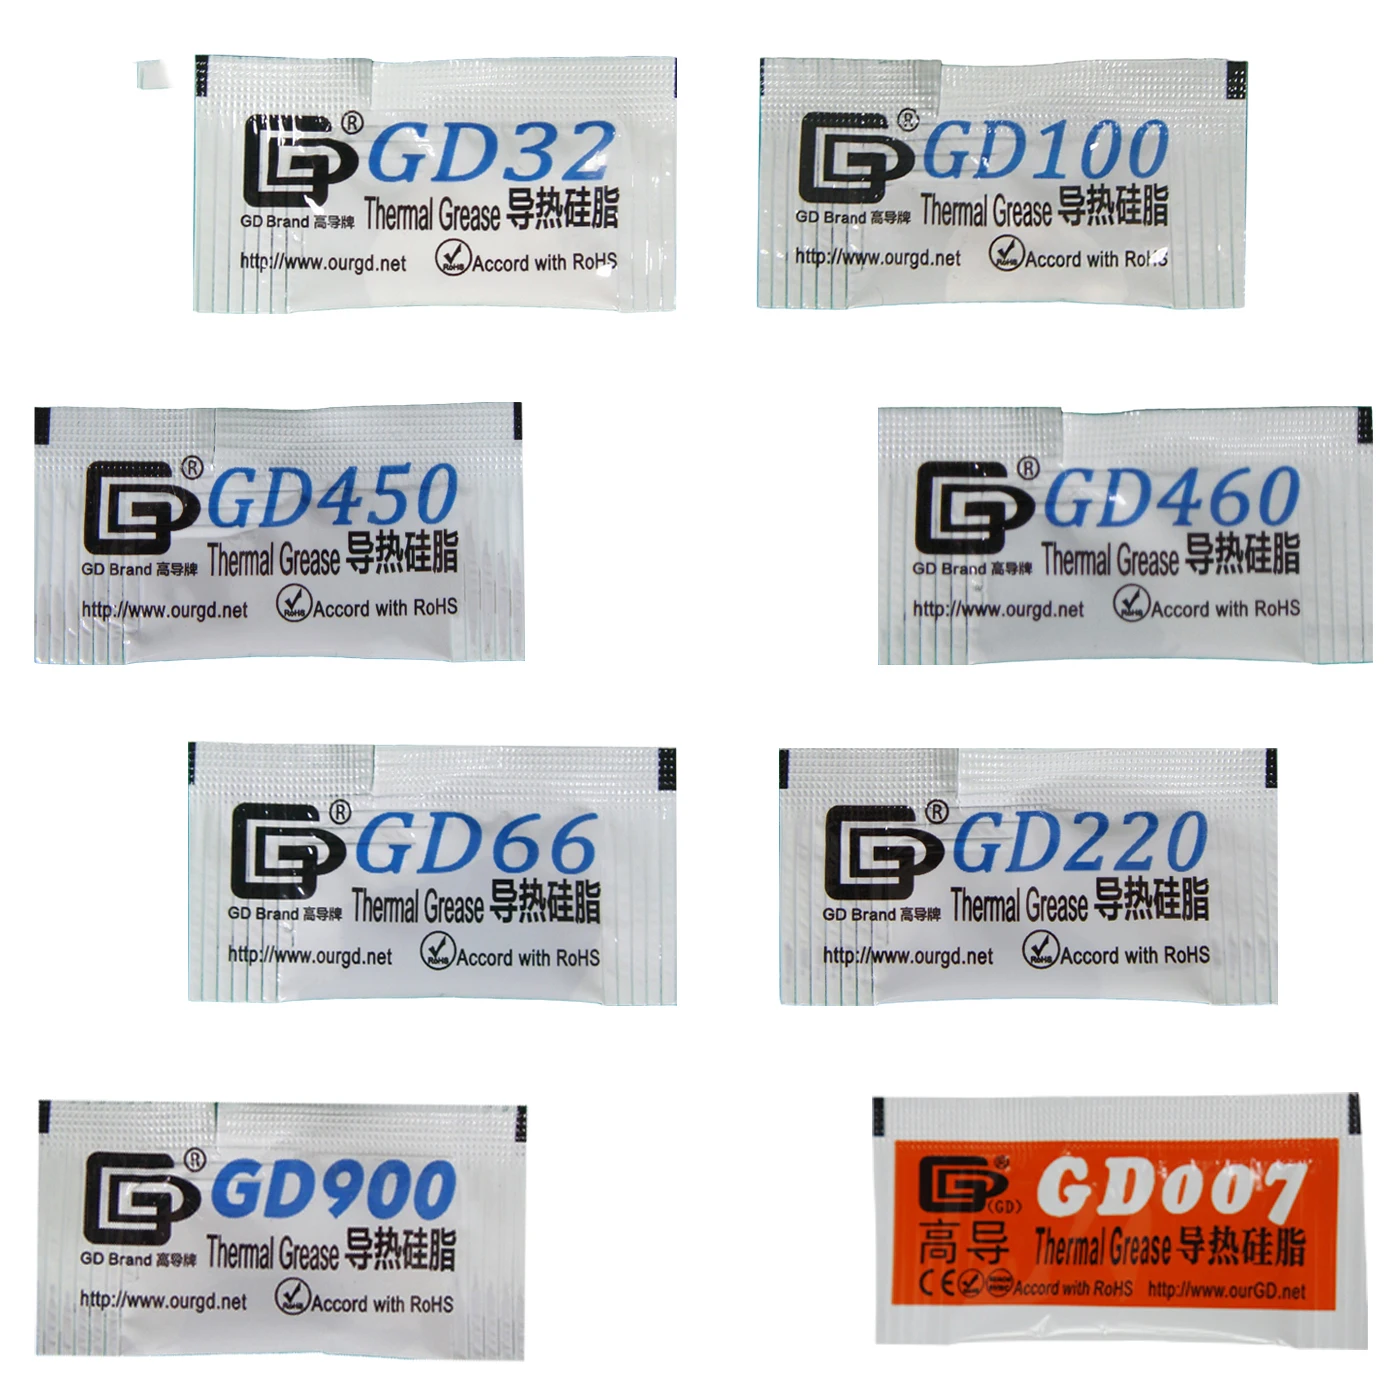 100 Pieces 0.5g Mini Bag Packaging GD Brand Series GD900 Thermal Grease Paste CPU Heat Sink Compound MB05